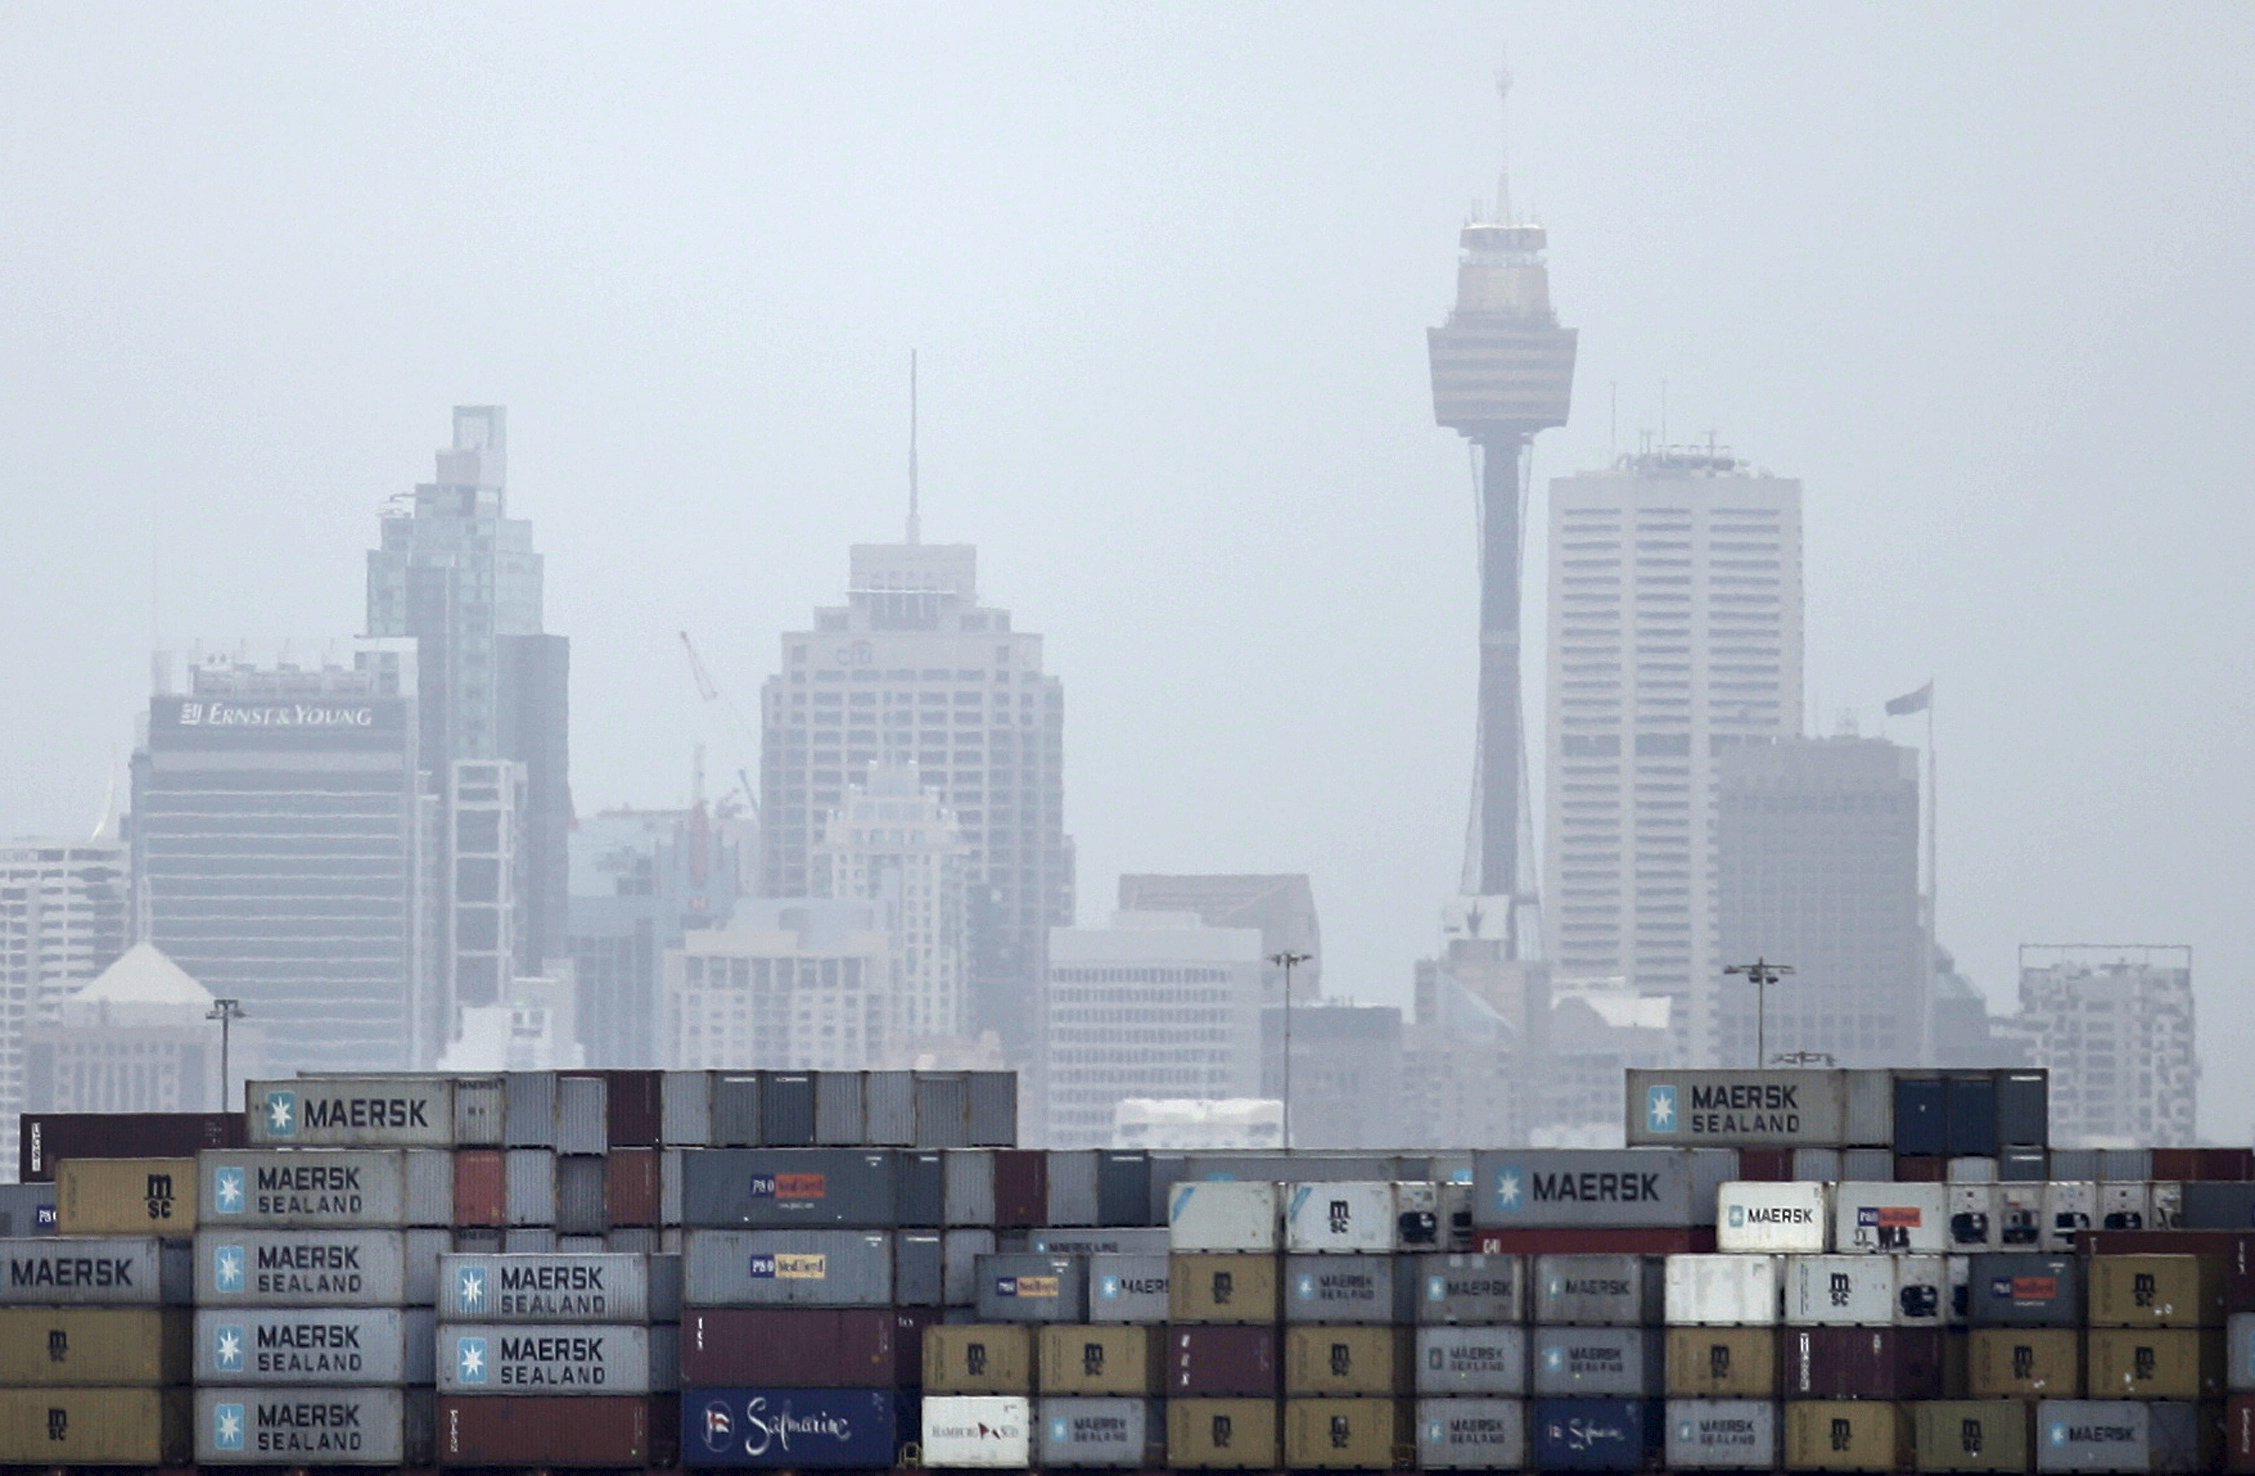 A container ship passes in front of the Sydney skyline as it departs from Port Botany terminal in this February 24, 2010 file photo. Australia is expected to release trade balance data this week. REUTERS/Tim Wimborne/Files GLOBAL BUSINESS WEEK AHEAD PACKAGE - SEARCH "BUSINESS WEEK AHEAD OCTOBER 5" FOR ALL 29 IMAGES